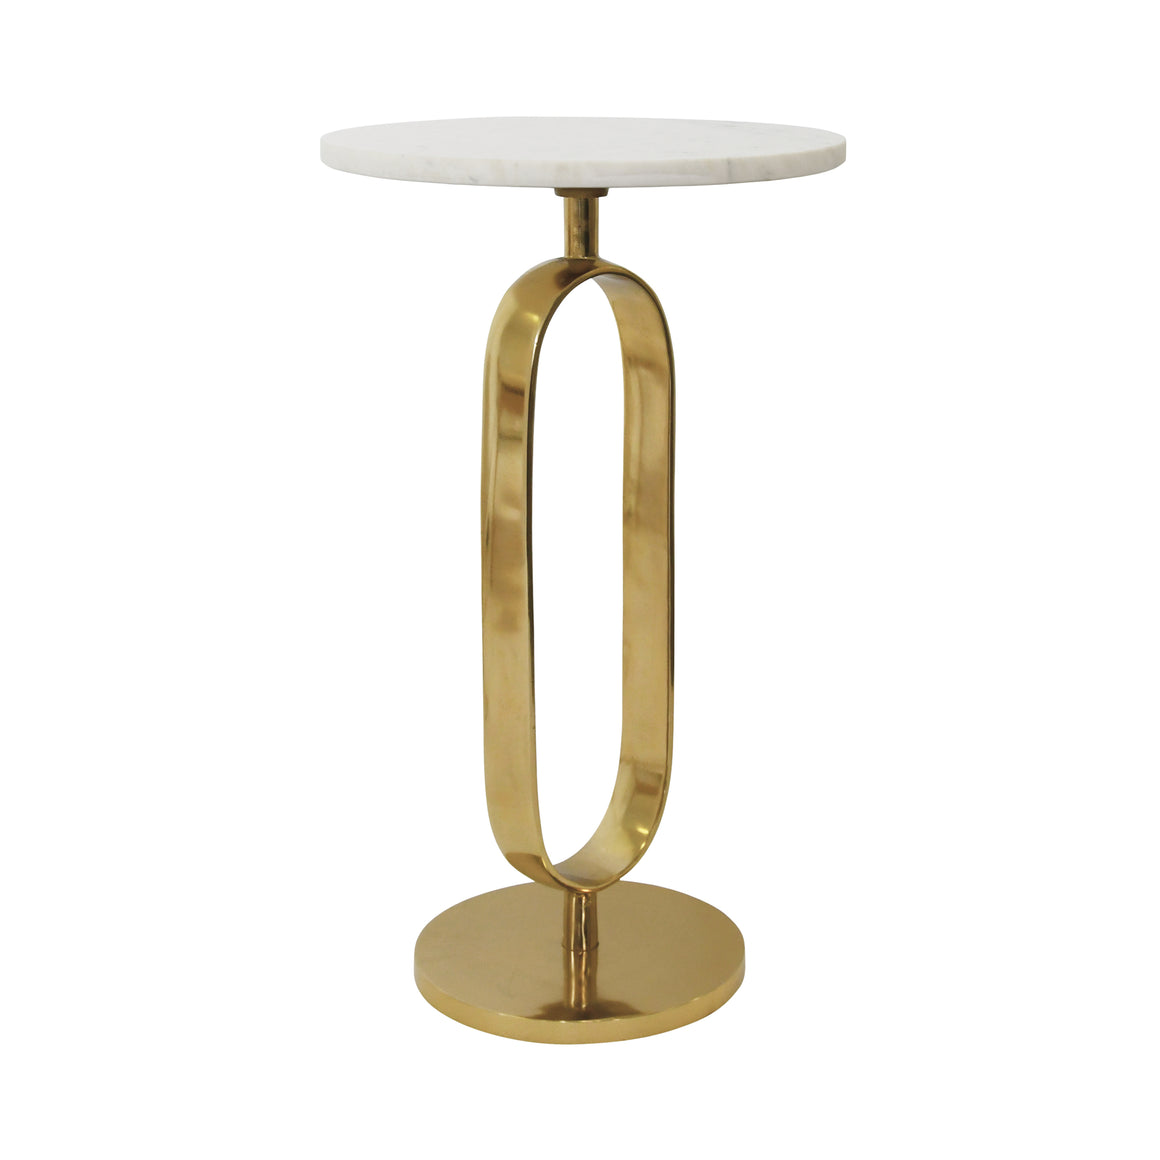 Maura Round Side Table with Brass Racetrack Base